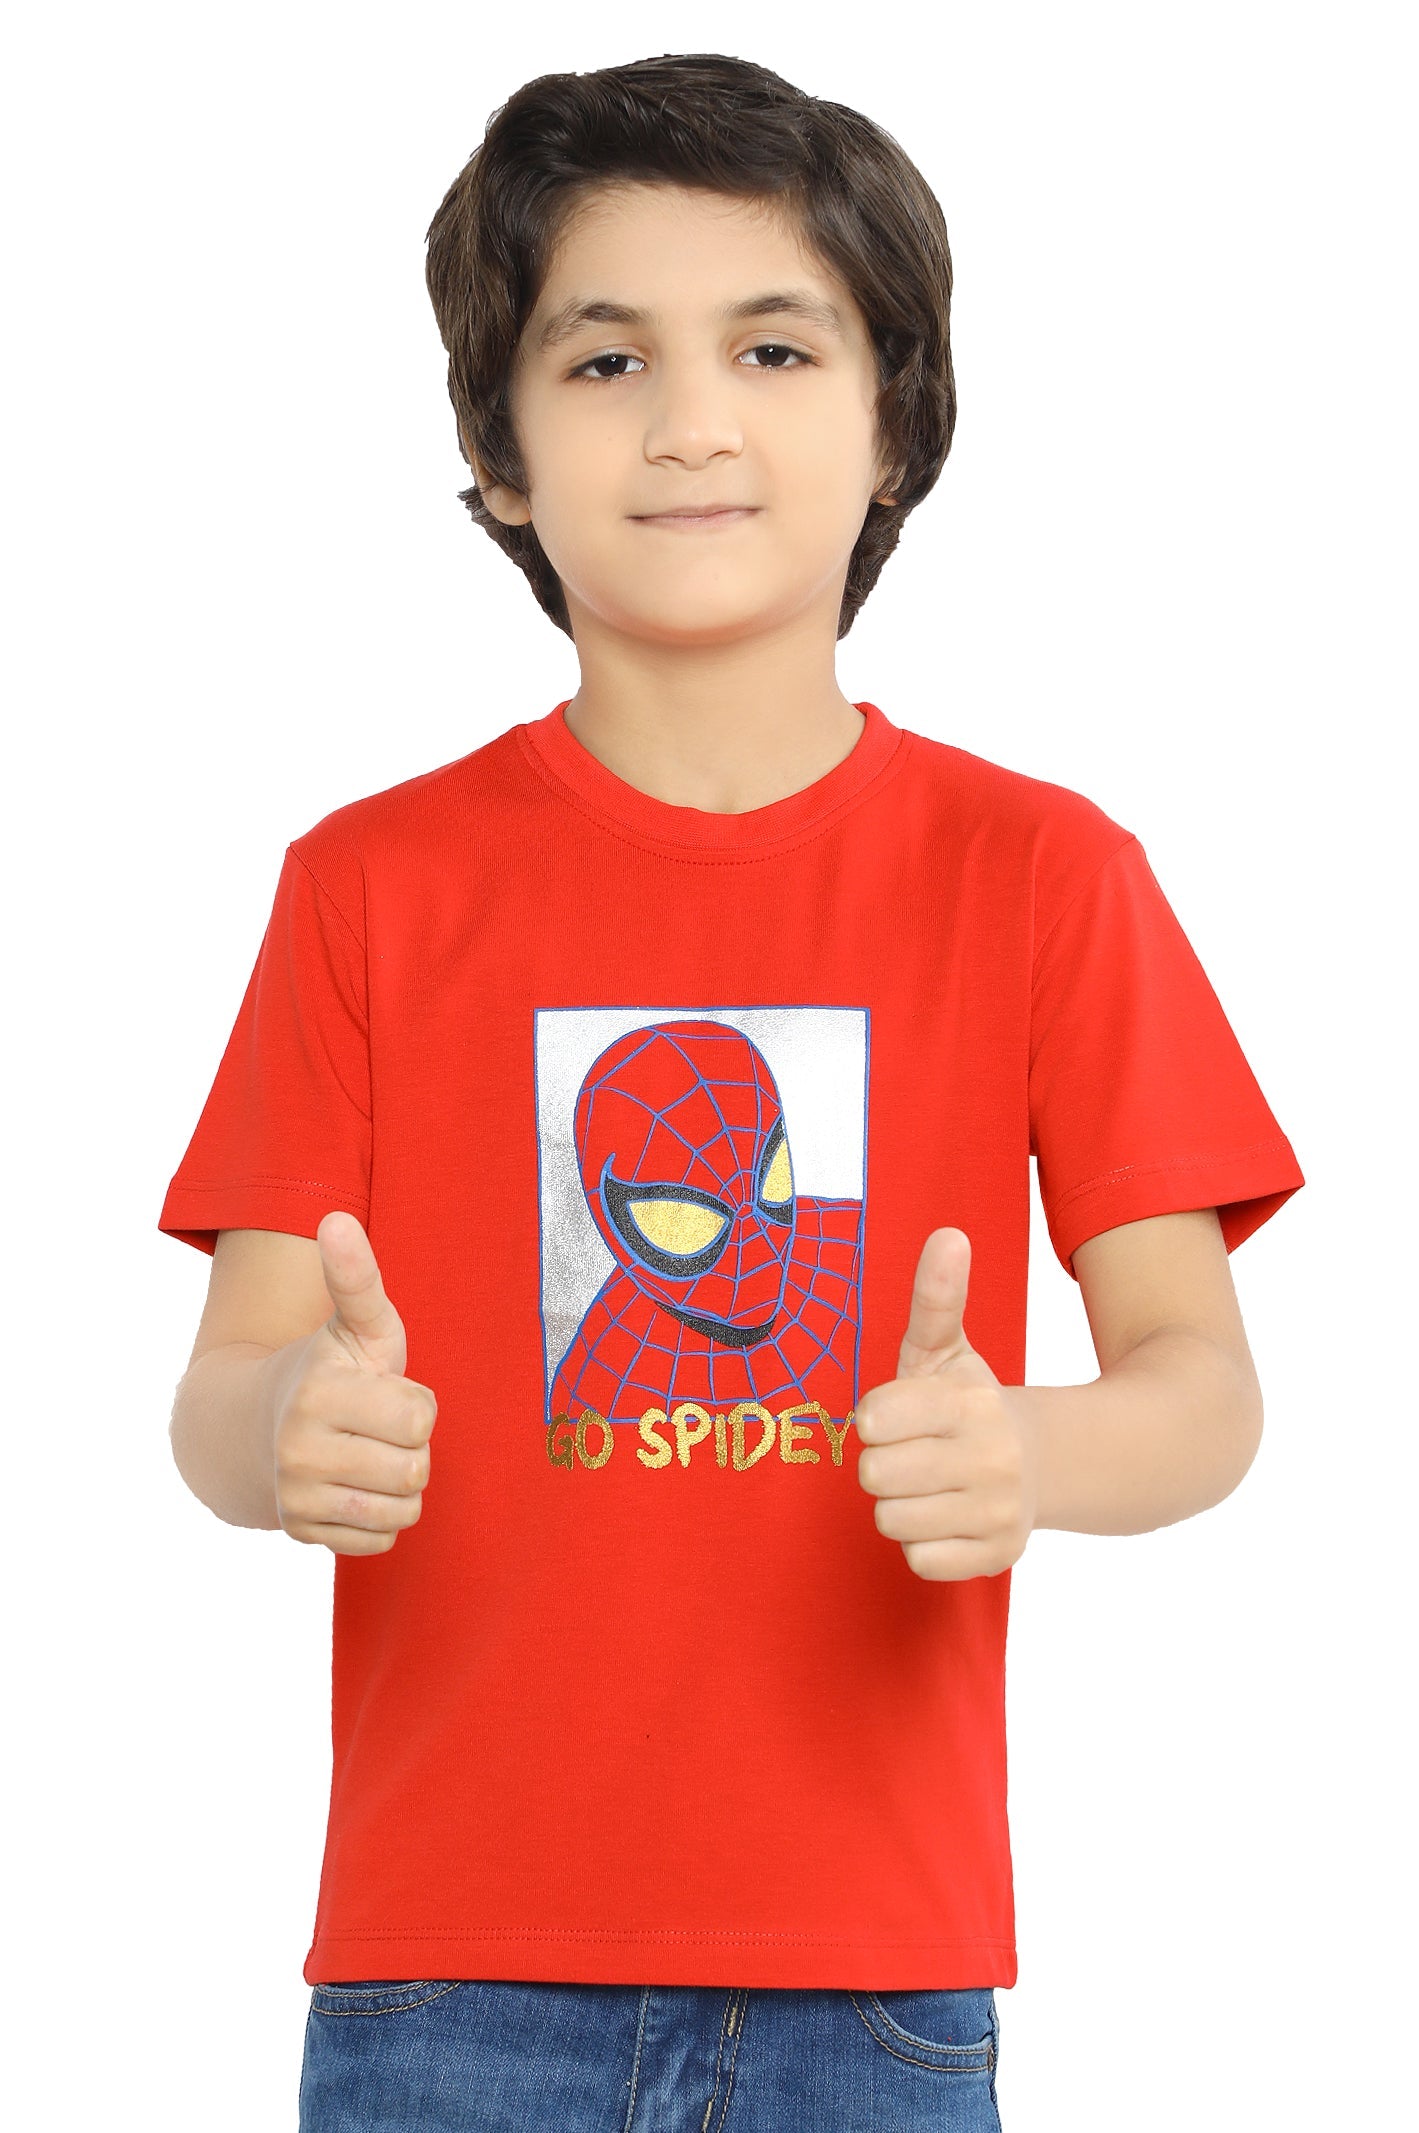 Boys Round Neck T-Shirt SKU: KBA-0437-RED - Diners